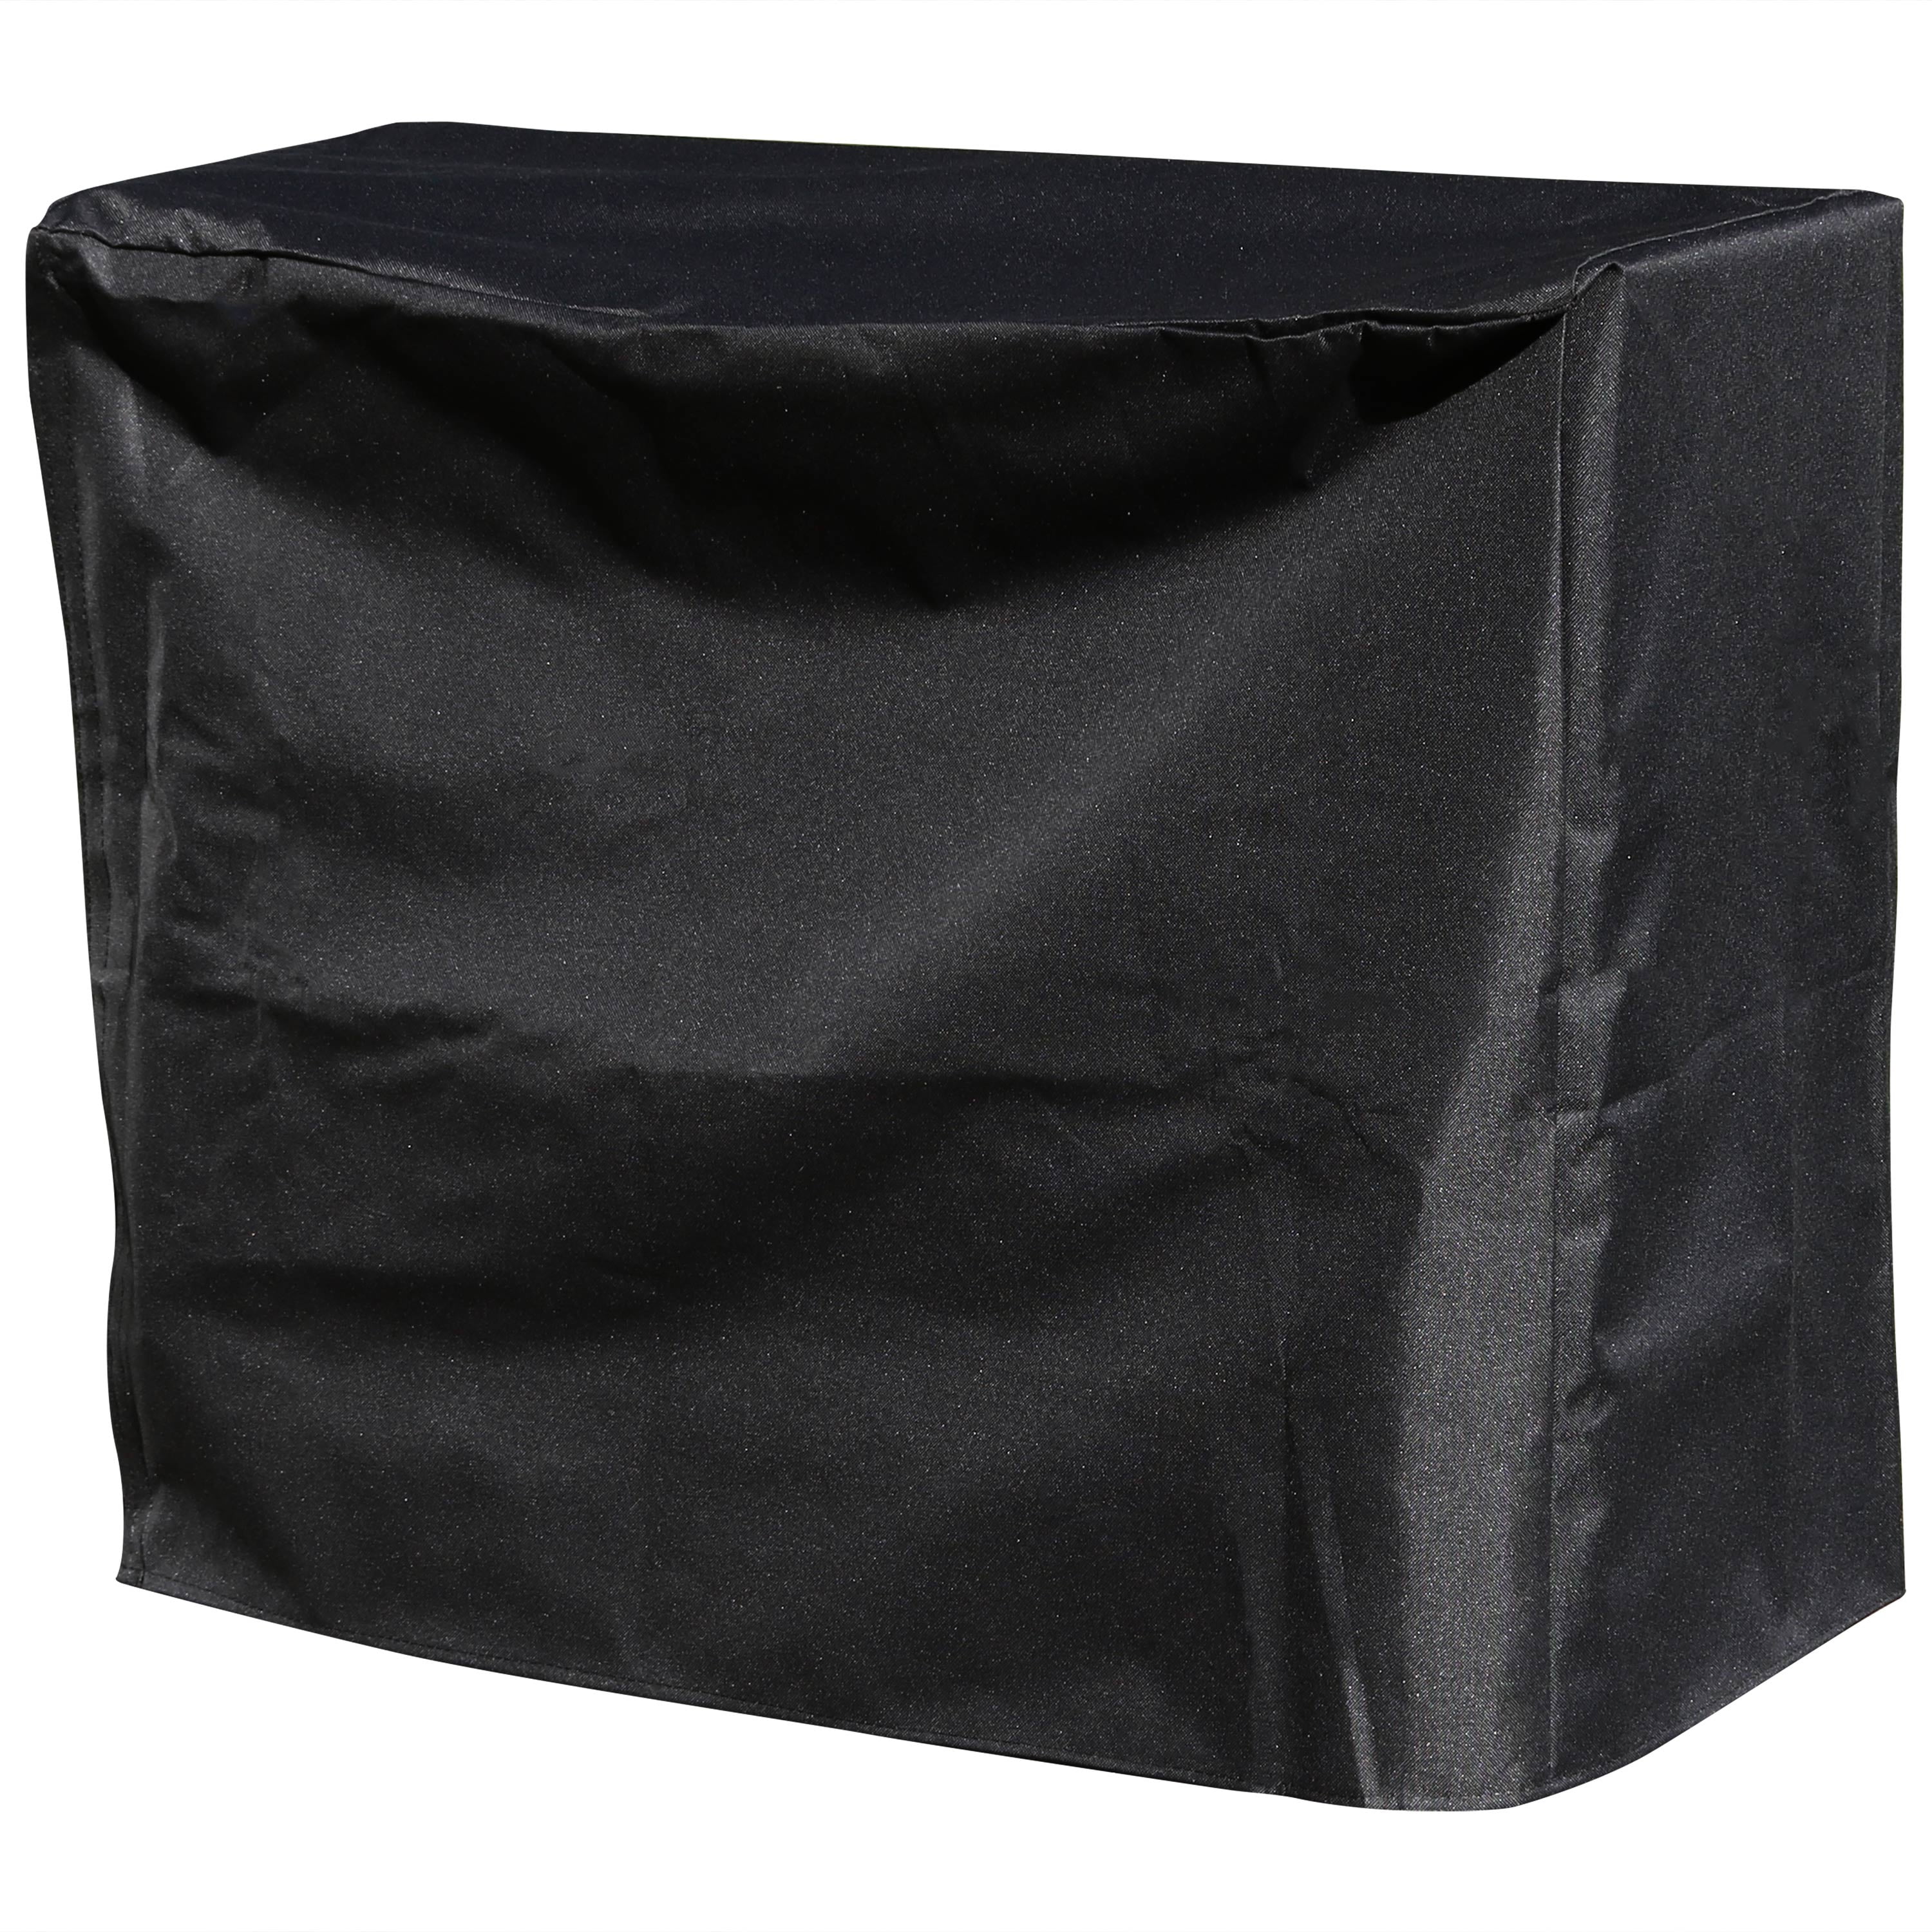 Sunnydaze Cover for Log Rack Waterproof Black Polyester with PVC Backing 4' 